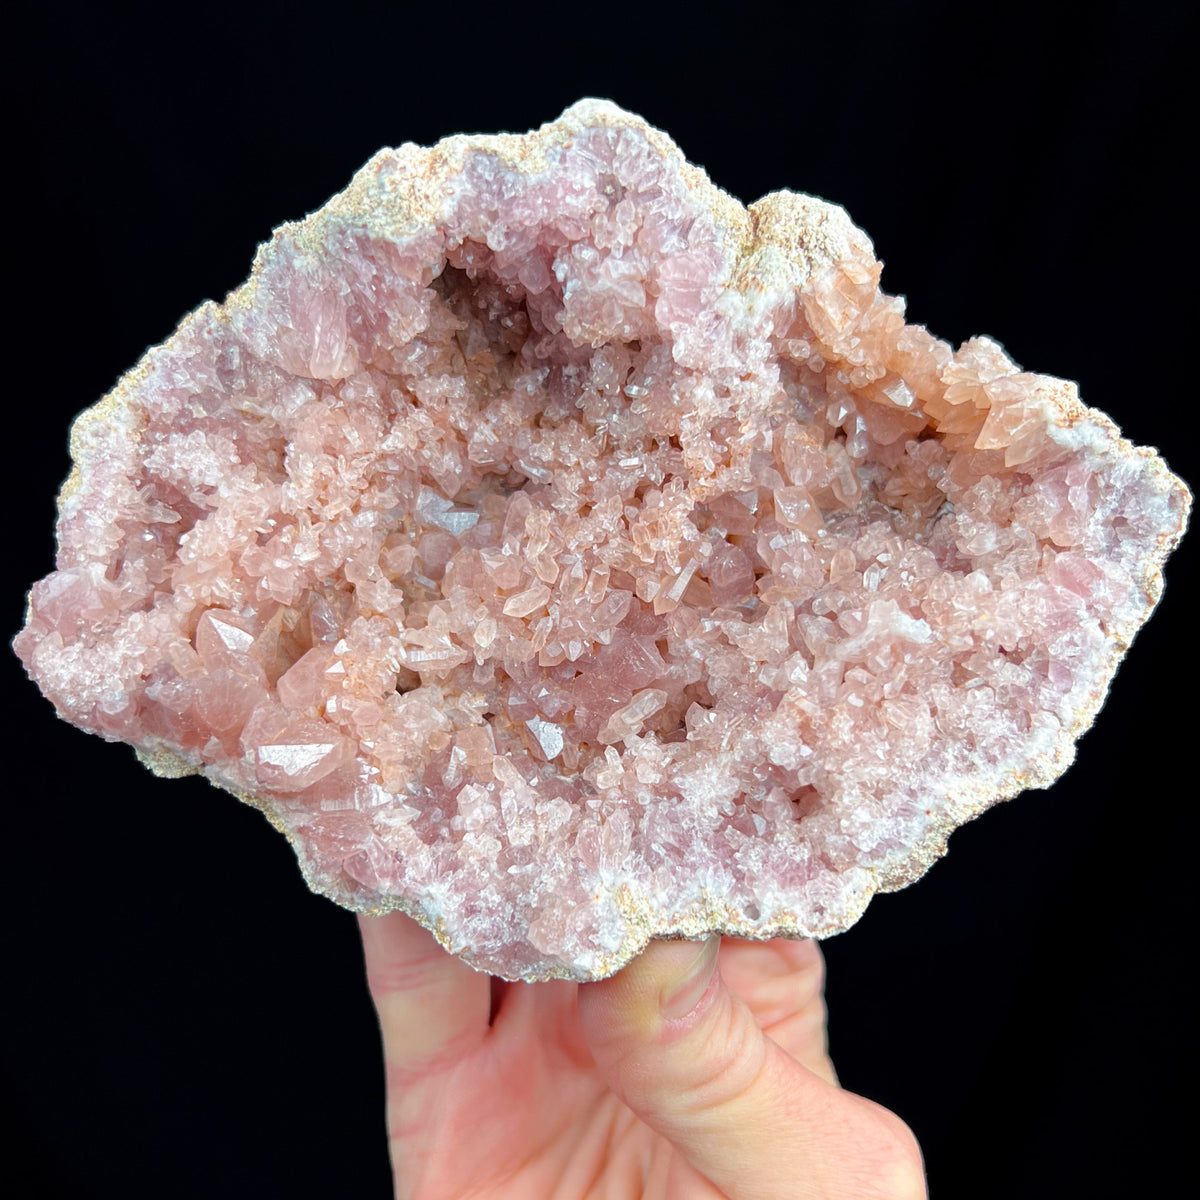 Extra Large Pink Amethyst Geode from Argentina